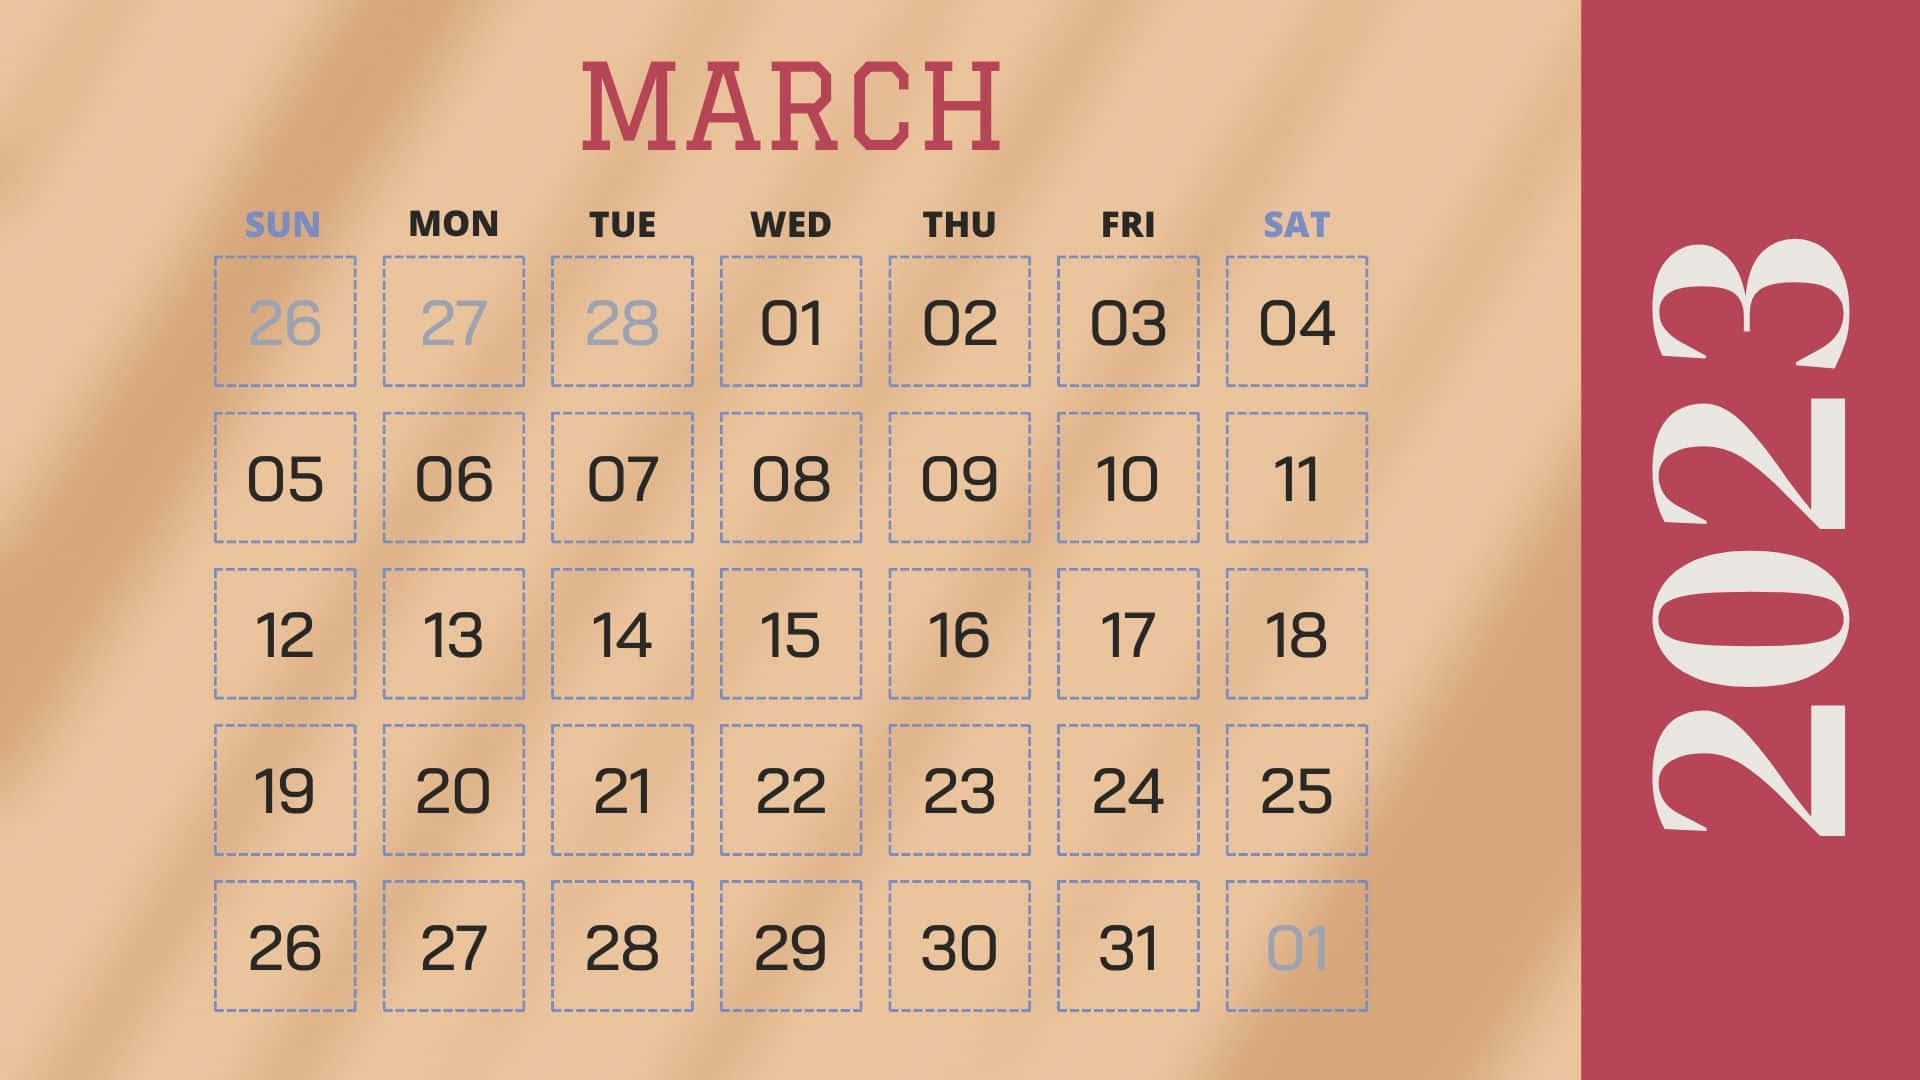 Plan your Activities with March 2023 Calendar Wallpaper